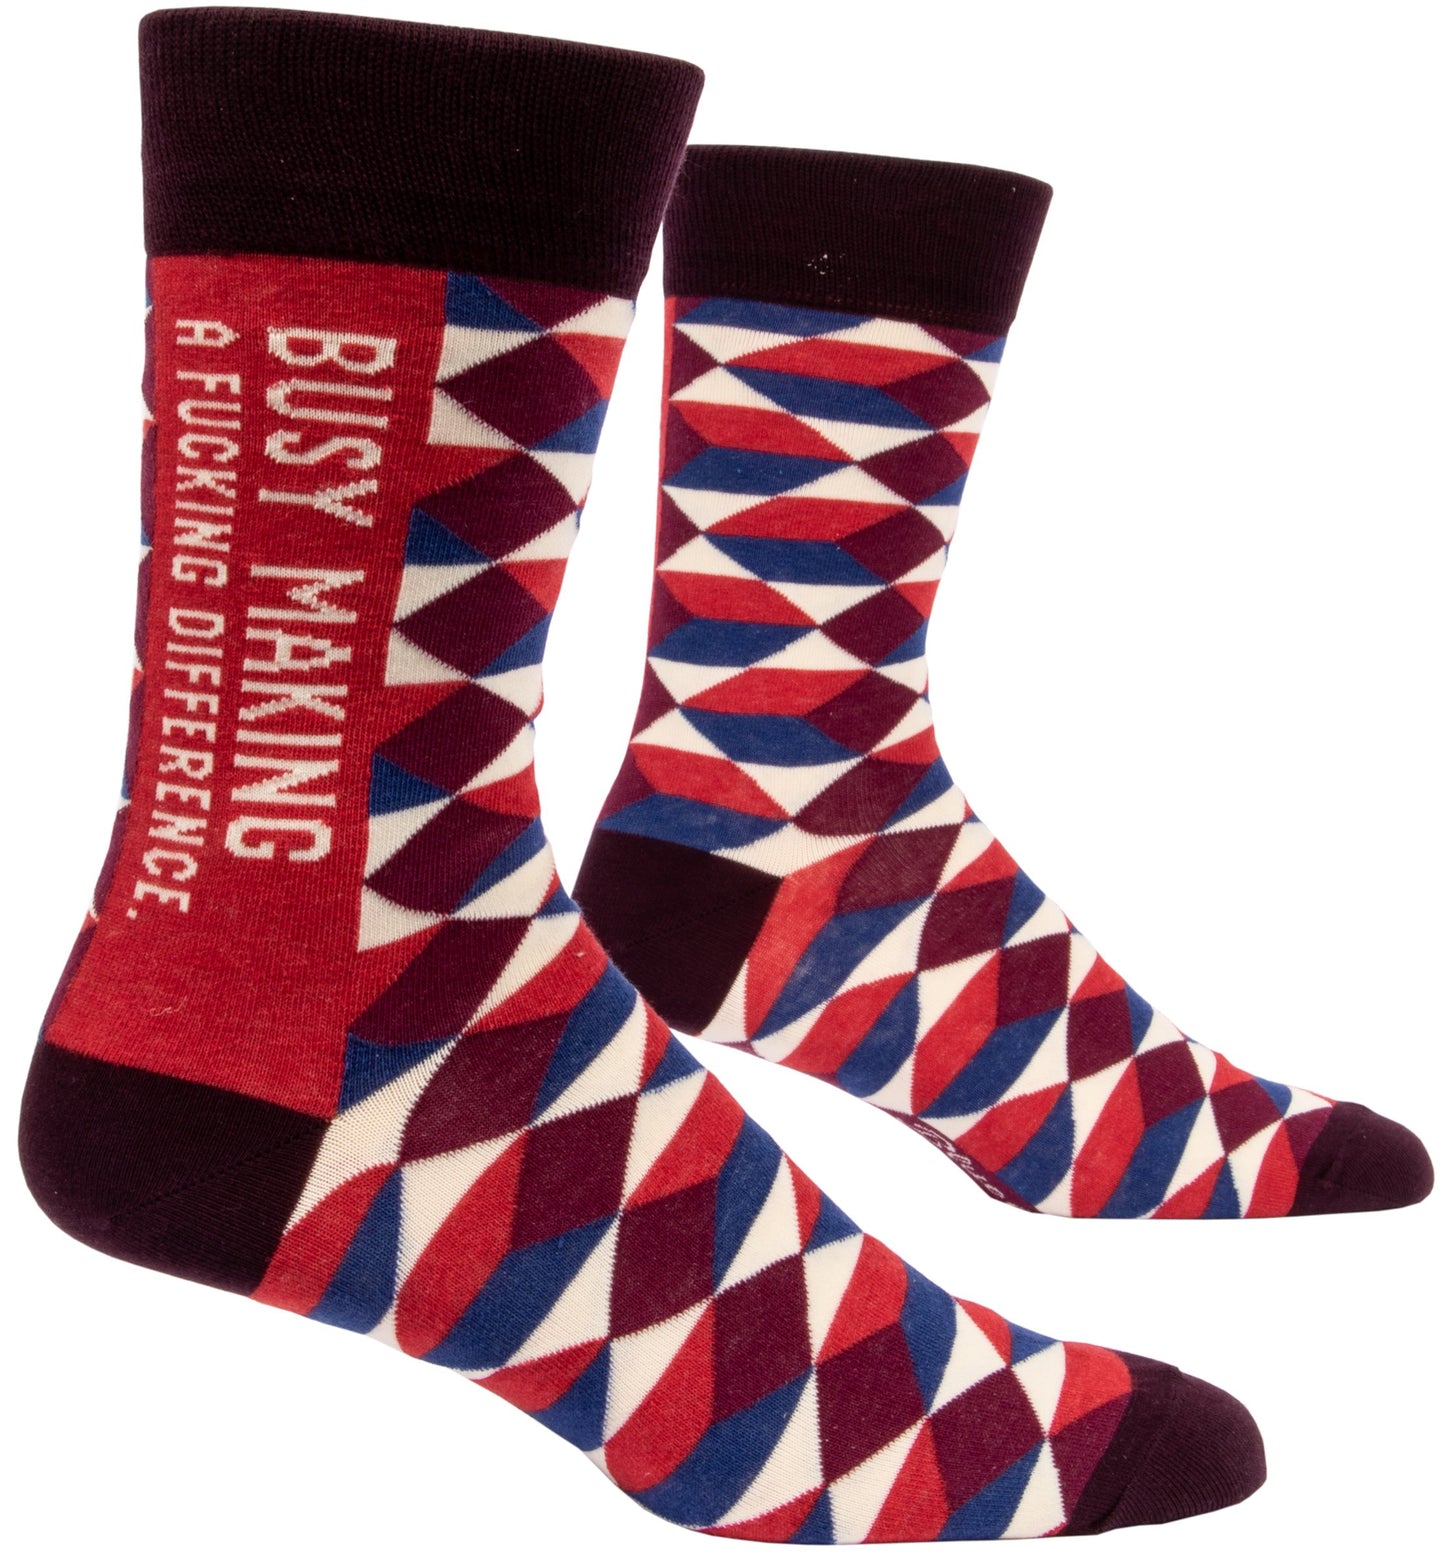 Blue Q - Men's Crew Socks - Busy Making a Fxxking Difference